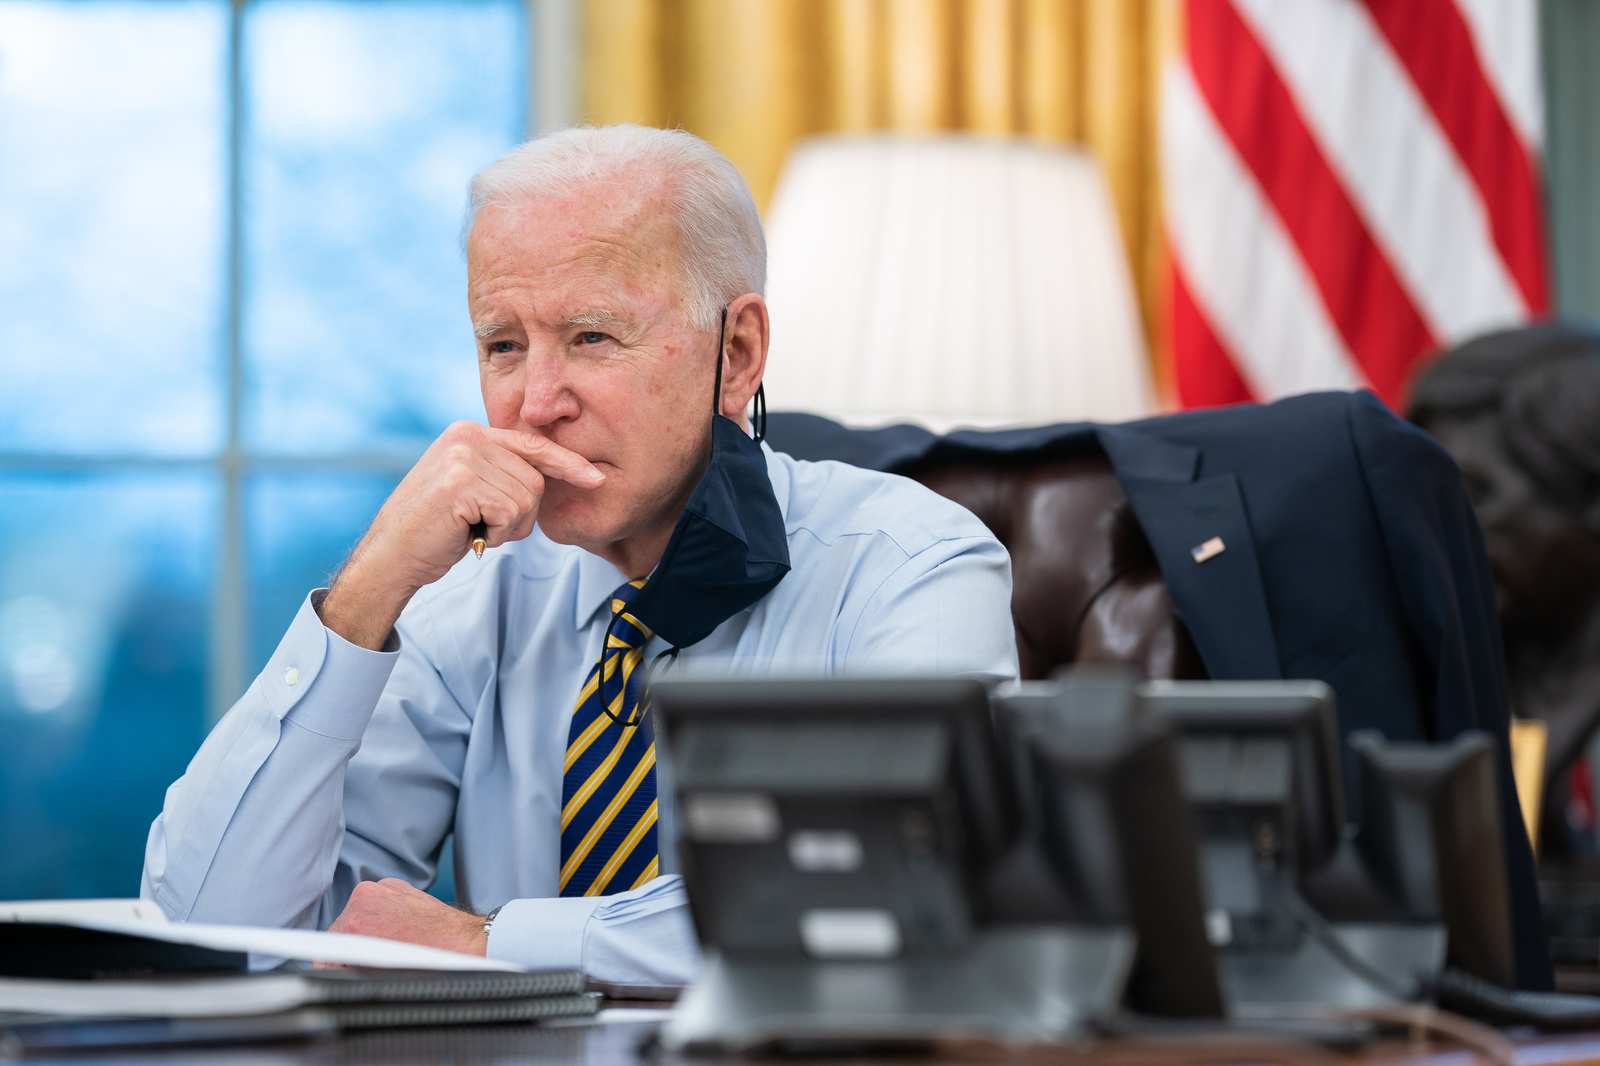 Biden threatens Xi with 'consequences' if China helps Russia's war in